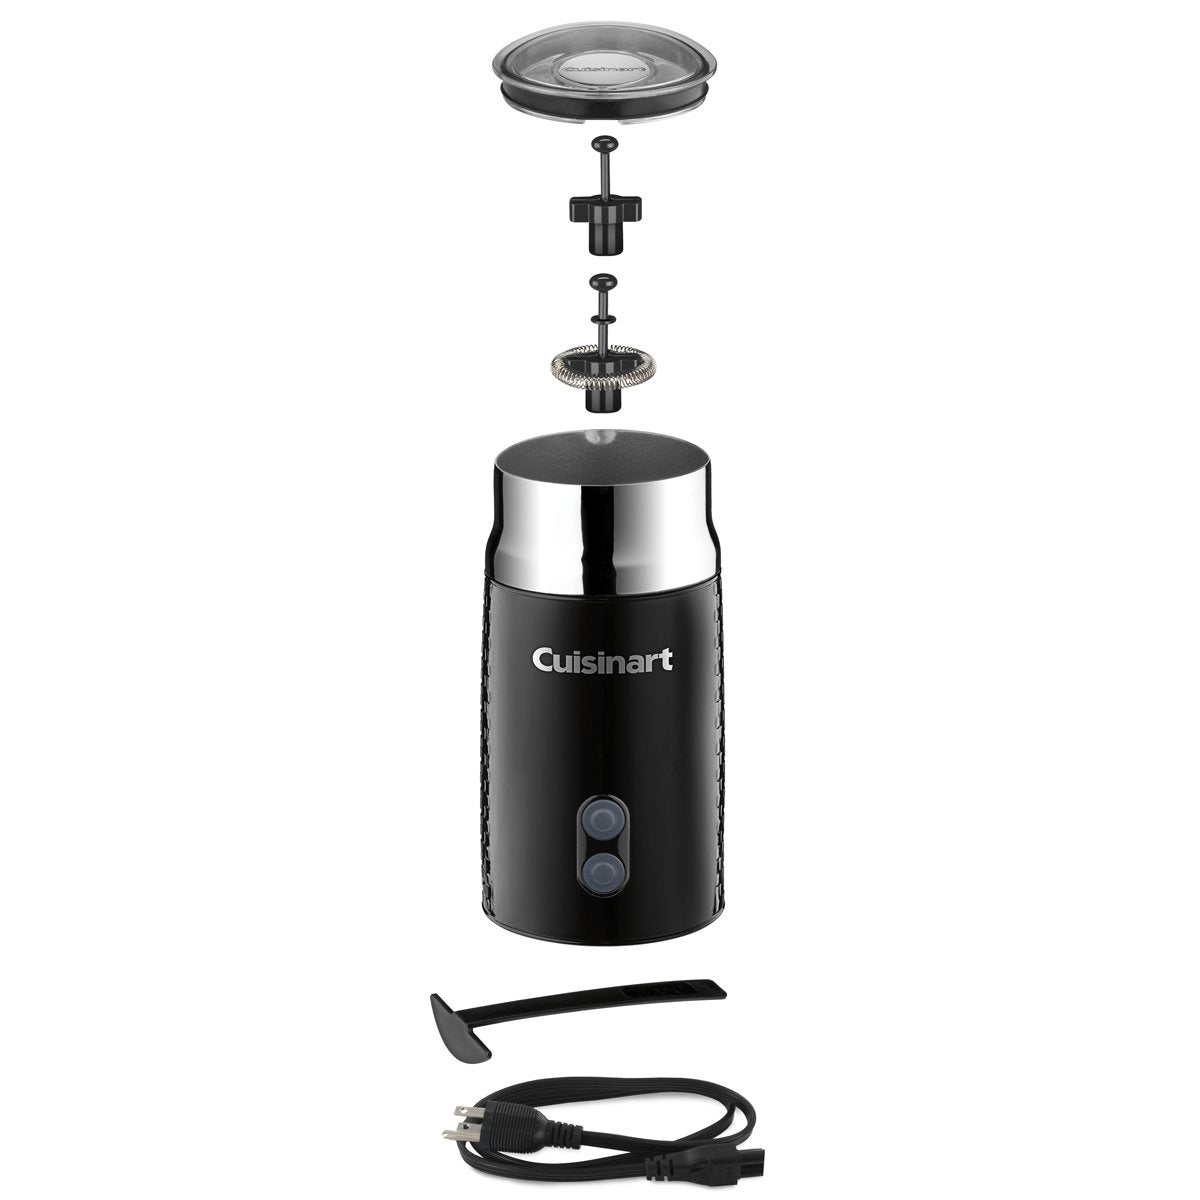 CUISINART Tazzaccino Milk Frother, FR-10C, Black – OneDealOutlet Featured  Deals